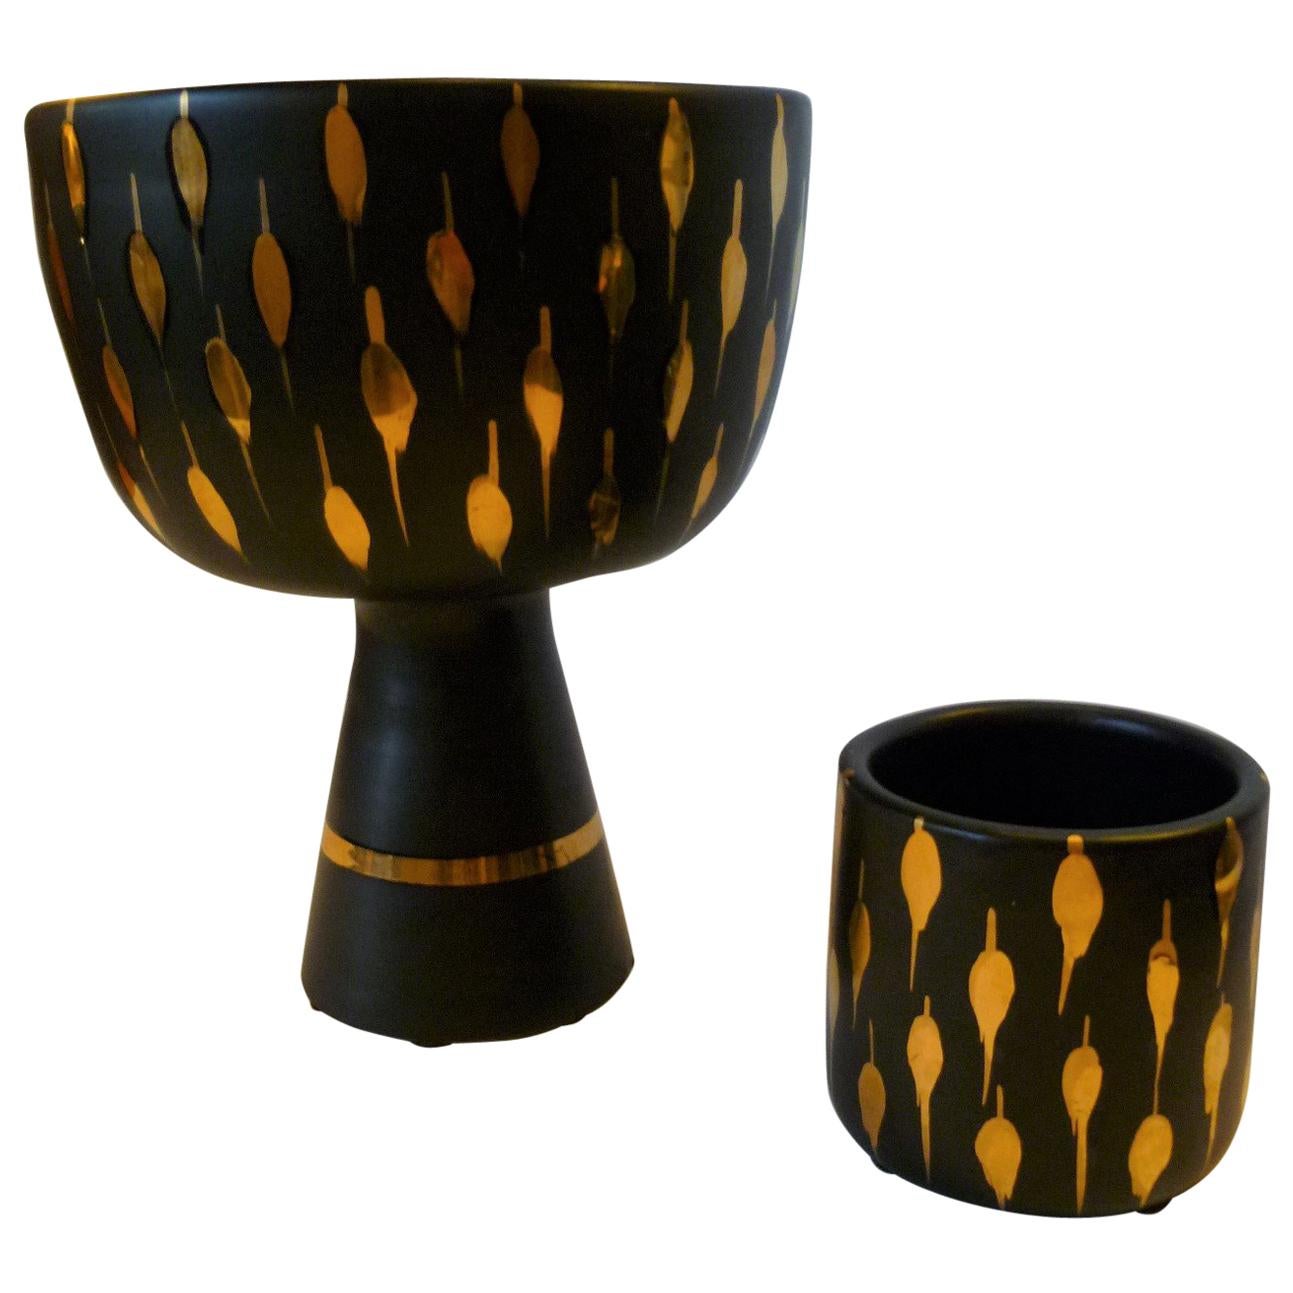 Italian Mid-Century Modern Pair of Black and Gold Pottery Vessels